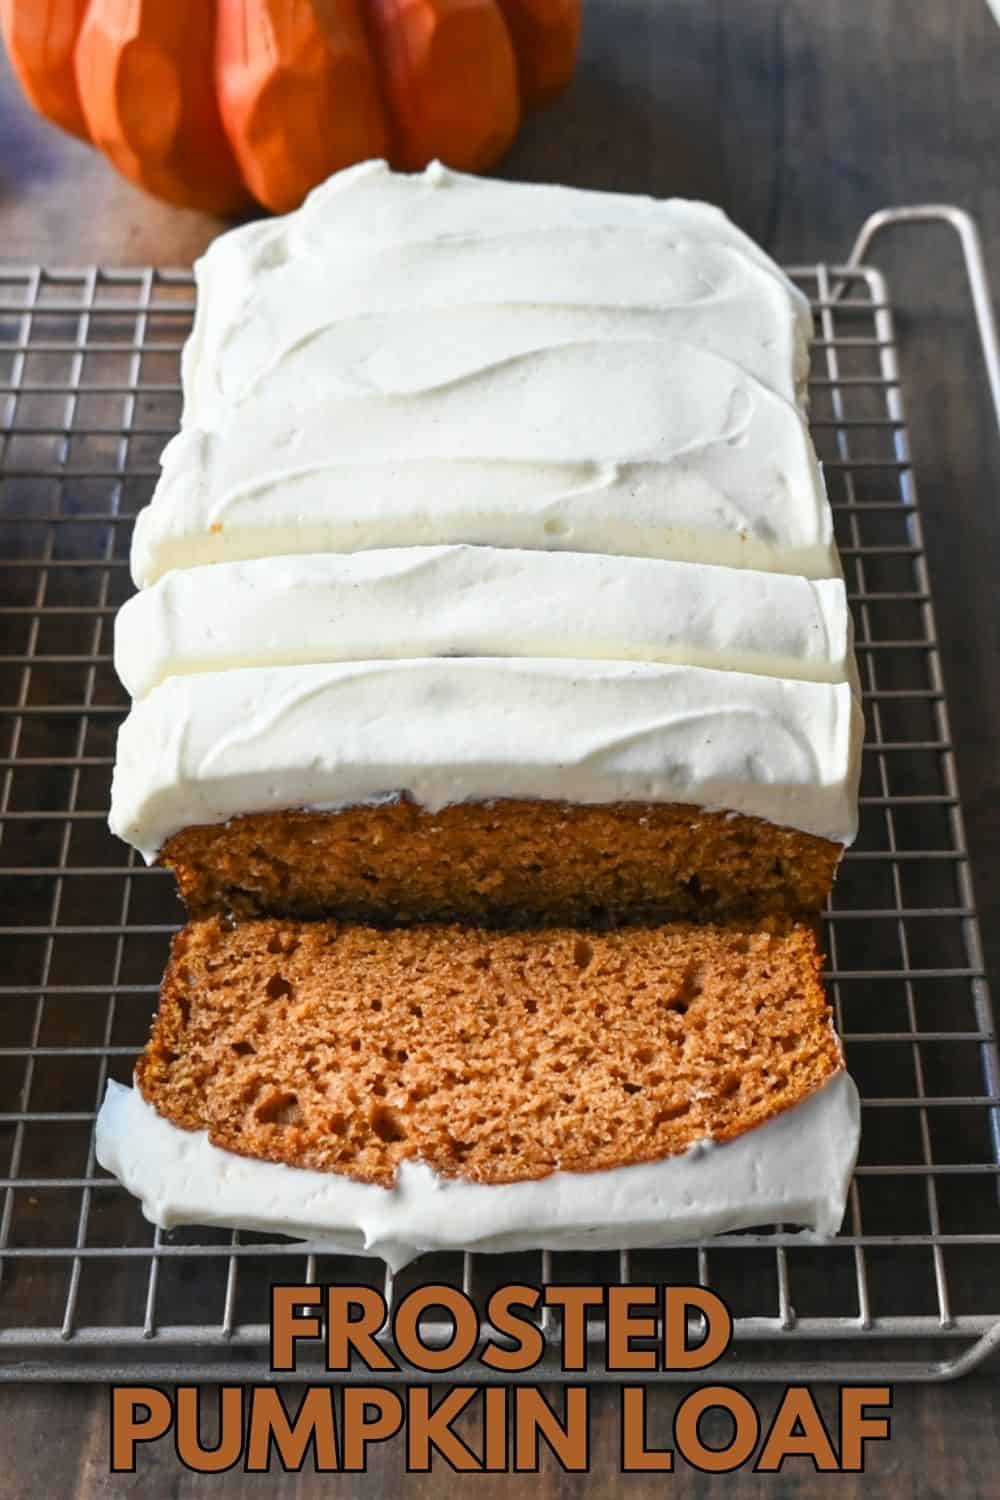 Frosted Pumpkin Loaf with Cream Cheese Frosting. Moist, soft pumpkin spice loaf topped with homemade cream cheese frosting. This frosted pumpkin bread is the perfect Fall treat.